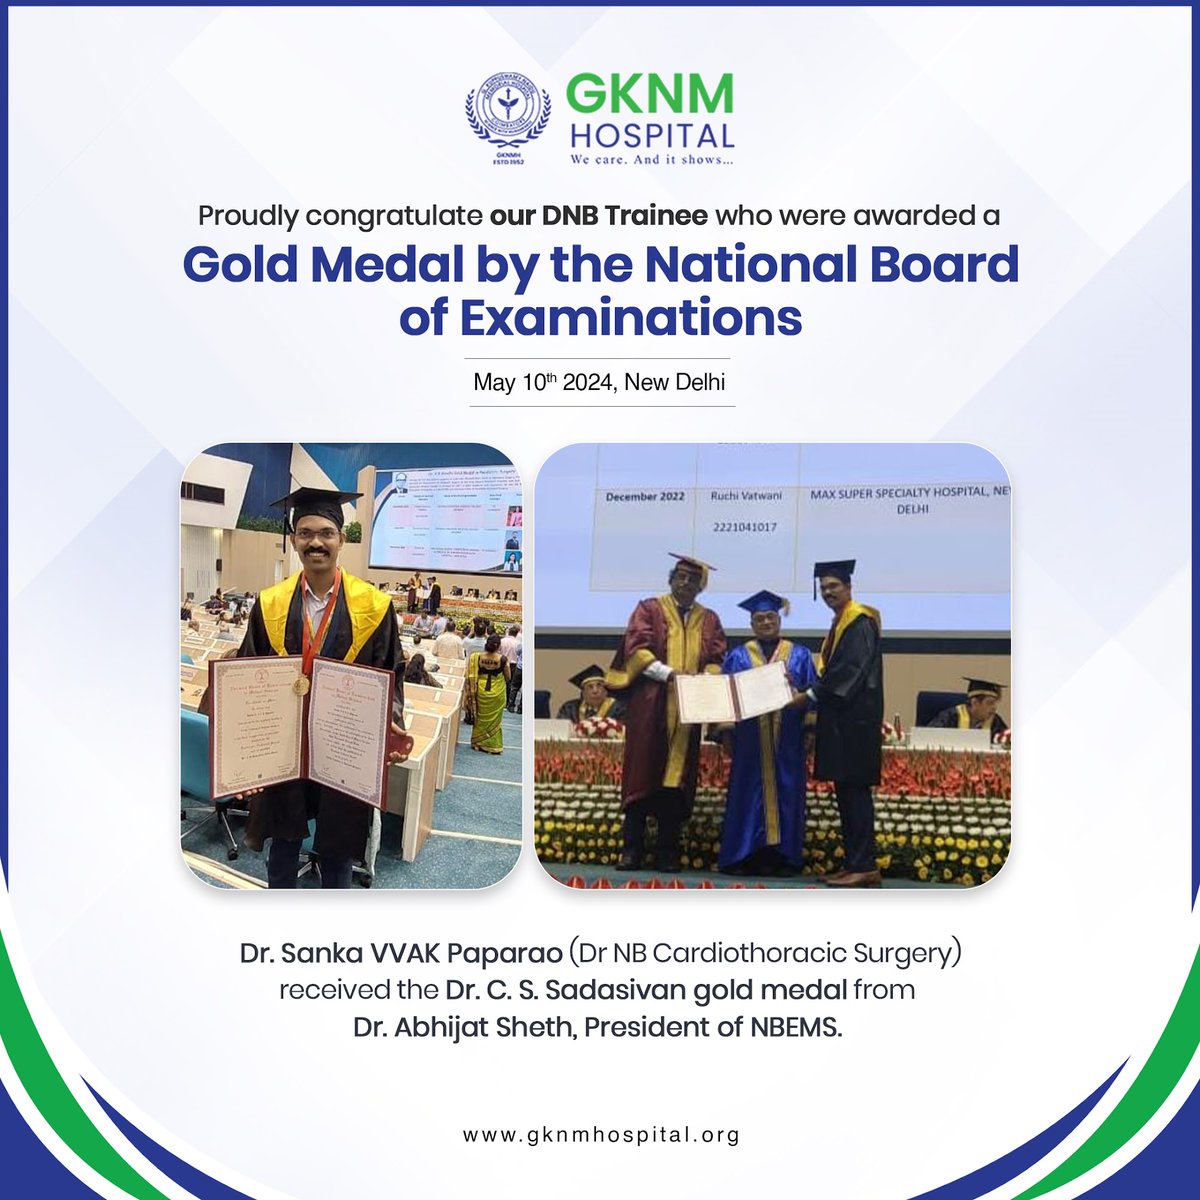 We share with great pride that two of our #DNBTrainees have been awarded gold medals by the National Board of Examinations, #NewDelhi for the final examination held in April 2023. #DNBTrainees #DNB #GoldMedals #NationalBoardofExamination #Recognition #GKNM #GKNMH #GKNMhospital